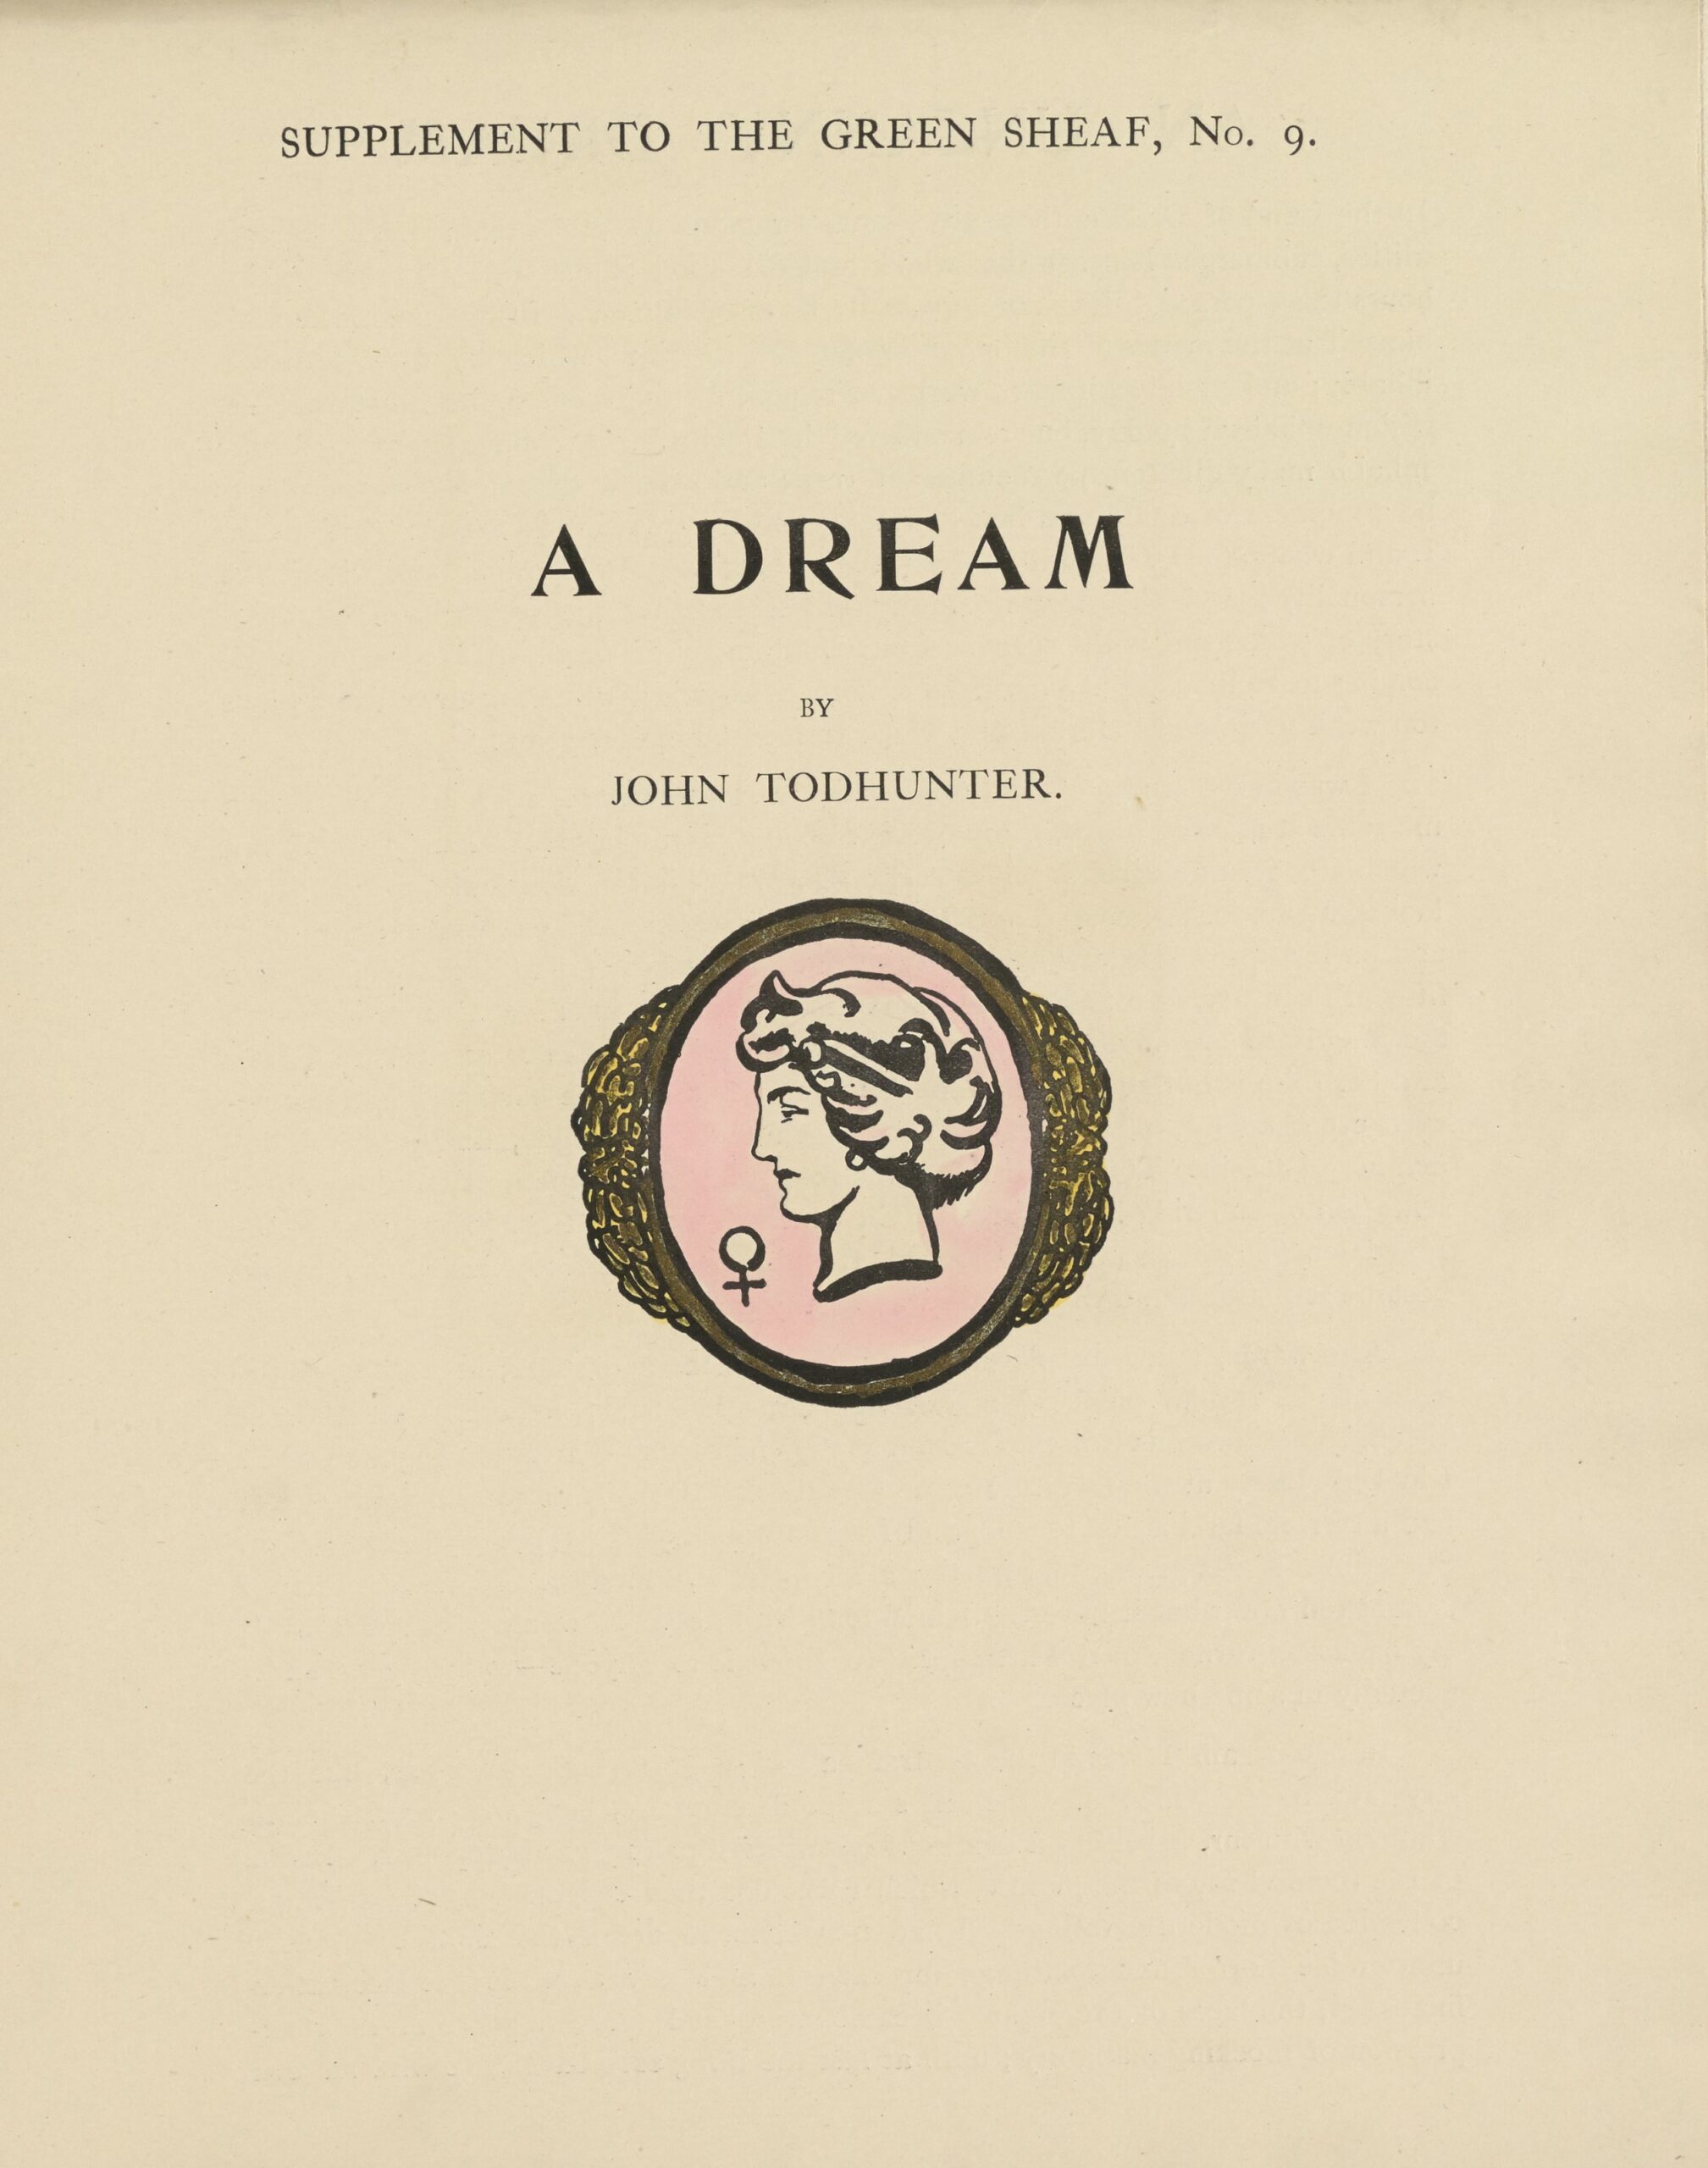 Figure 4. Decorated title-page for "A Dream," by John Todhunter.                        Supplement to The Green Sheaf, No. 9, 1904.